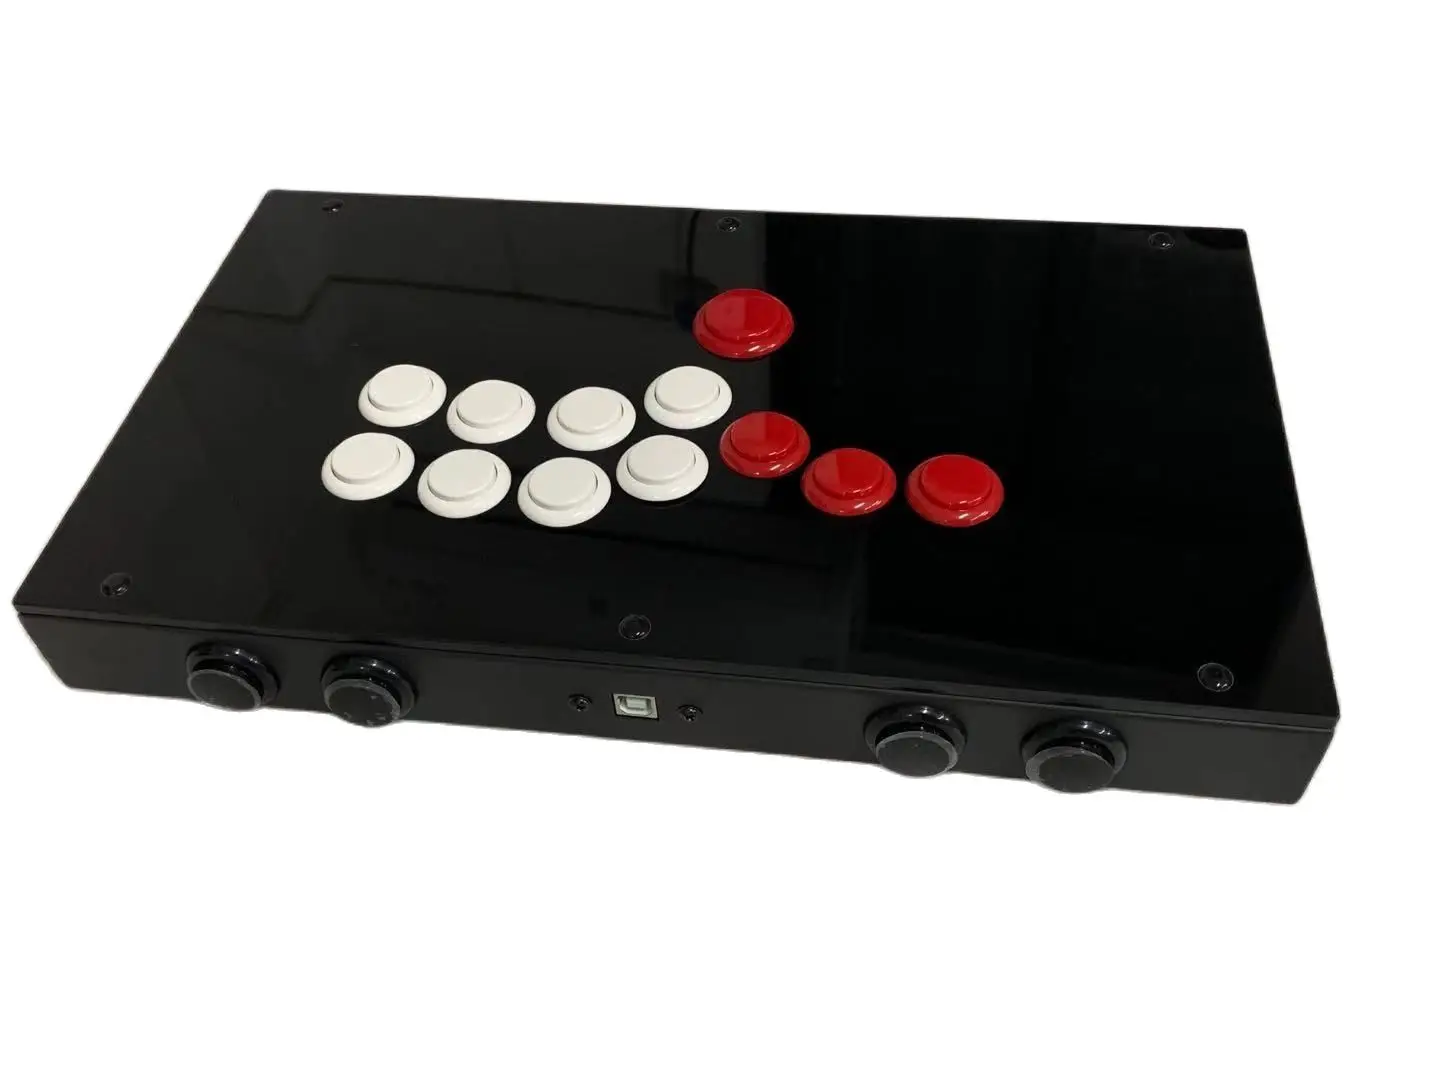 All Buttons Hitbox Style Arcade Joystick Fight Stick Game Controller For PS4/PS3/PC Sanwa OBSF-24 30